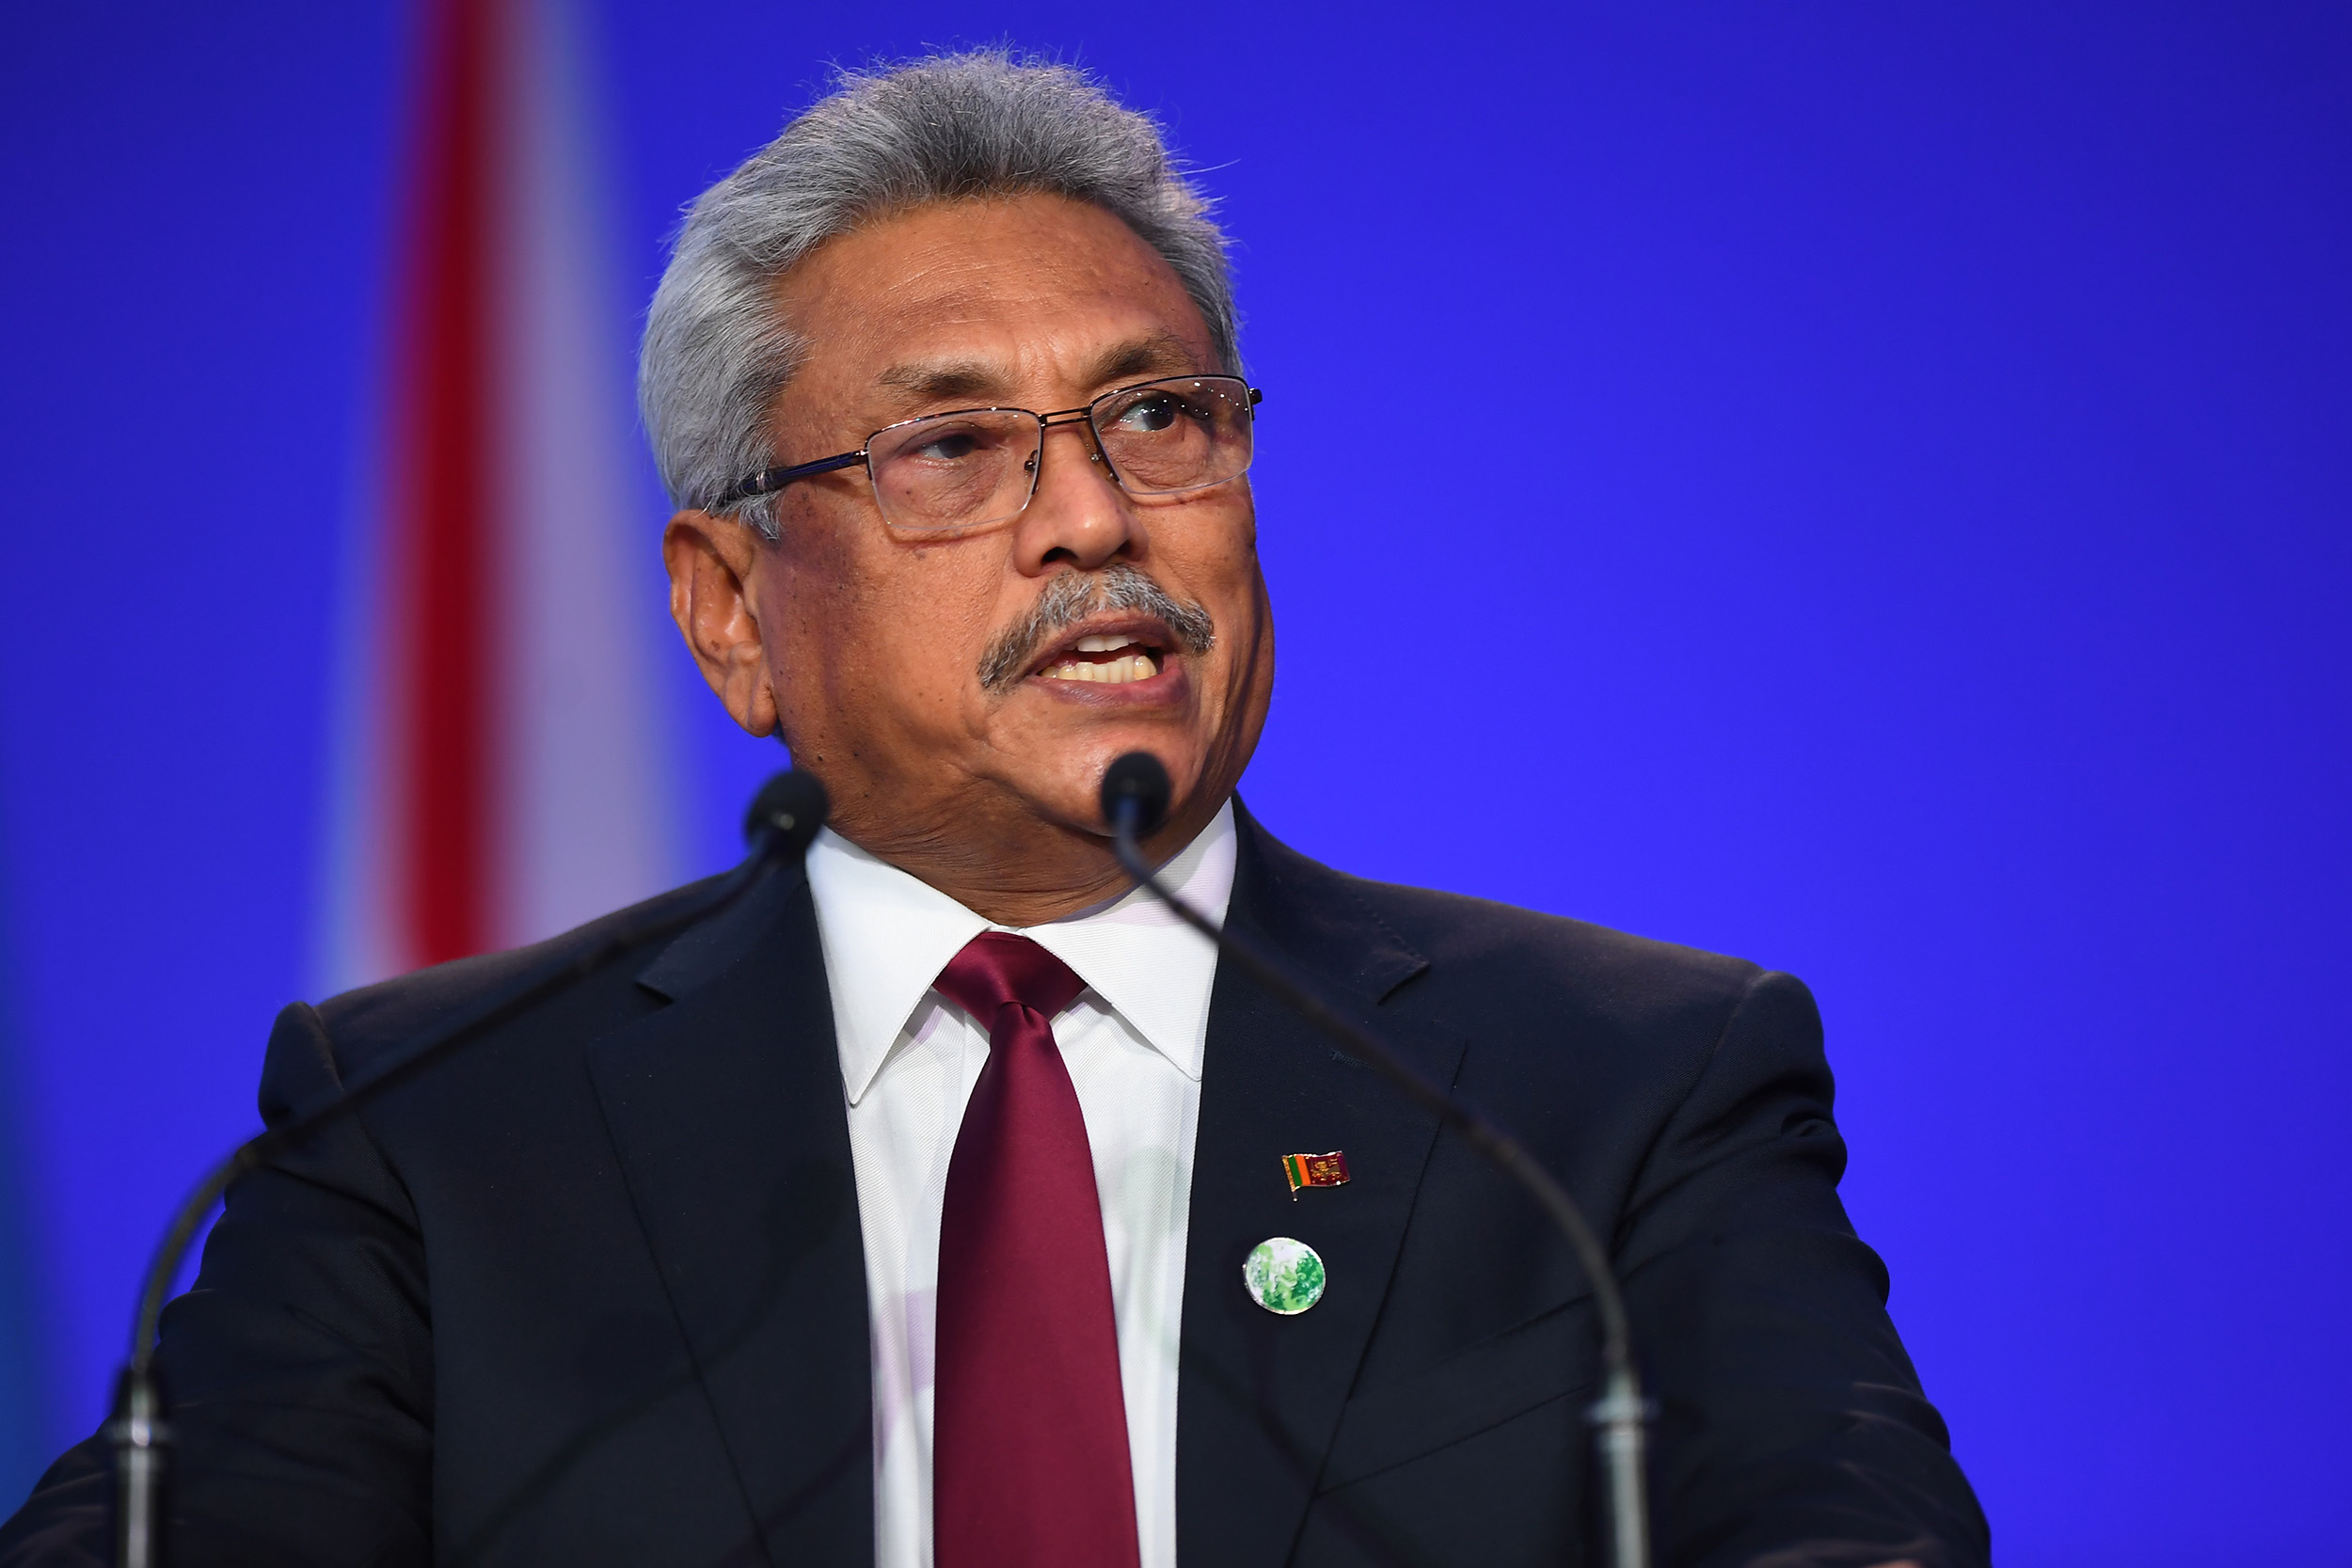 Sri Lankan President Gotabaya Rajapaksa delivers his national statement during the second day of COP26 at the SECC on November 1 in Glasgow, Scotland.